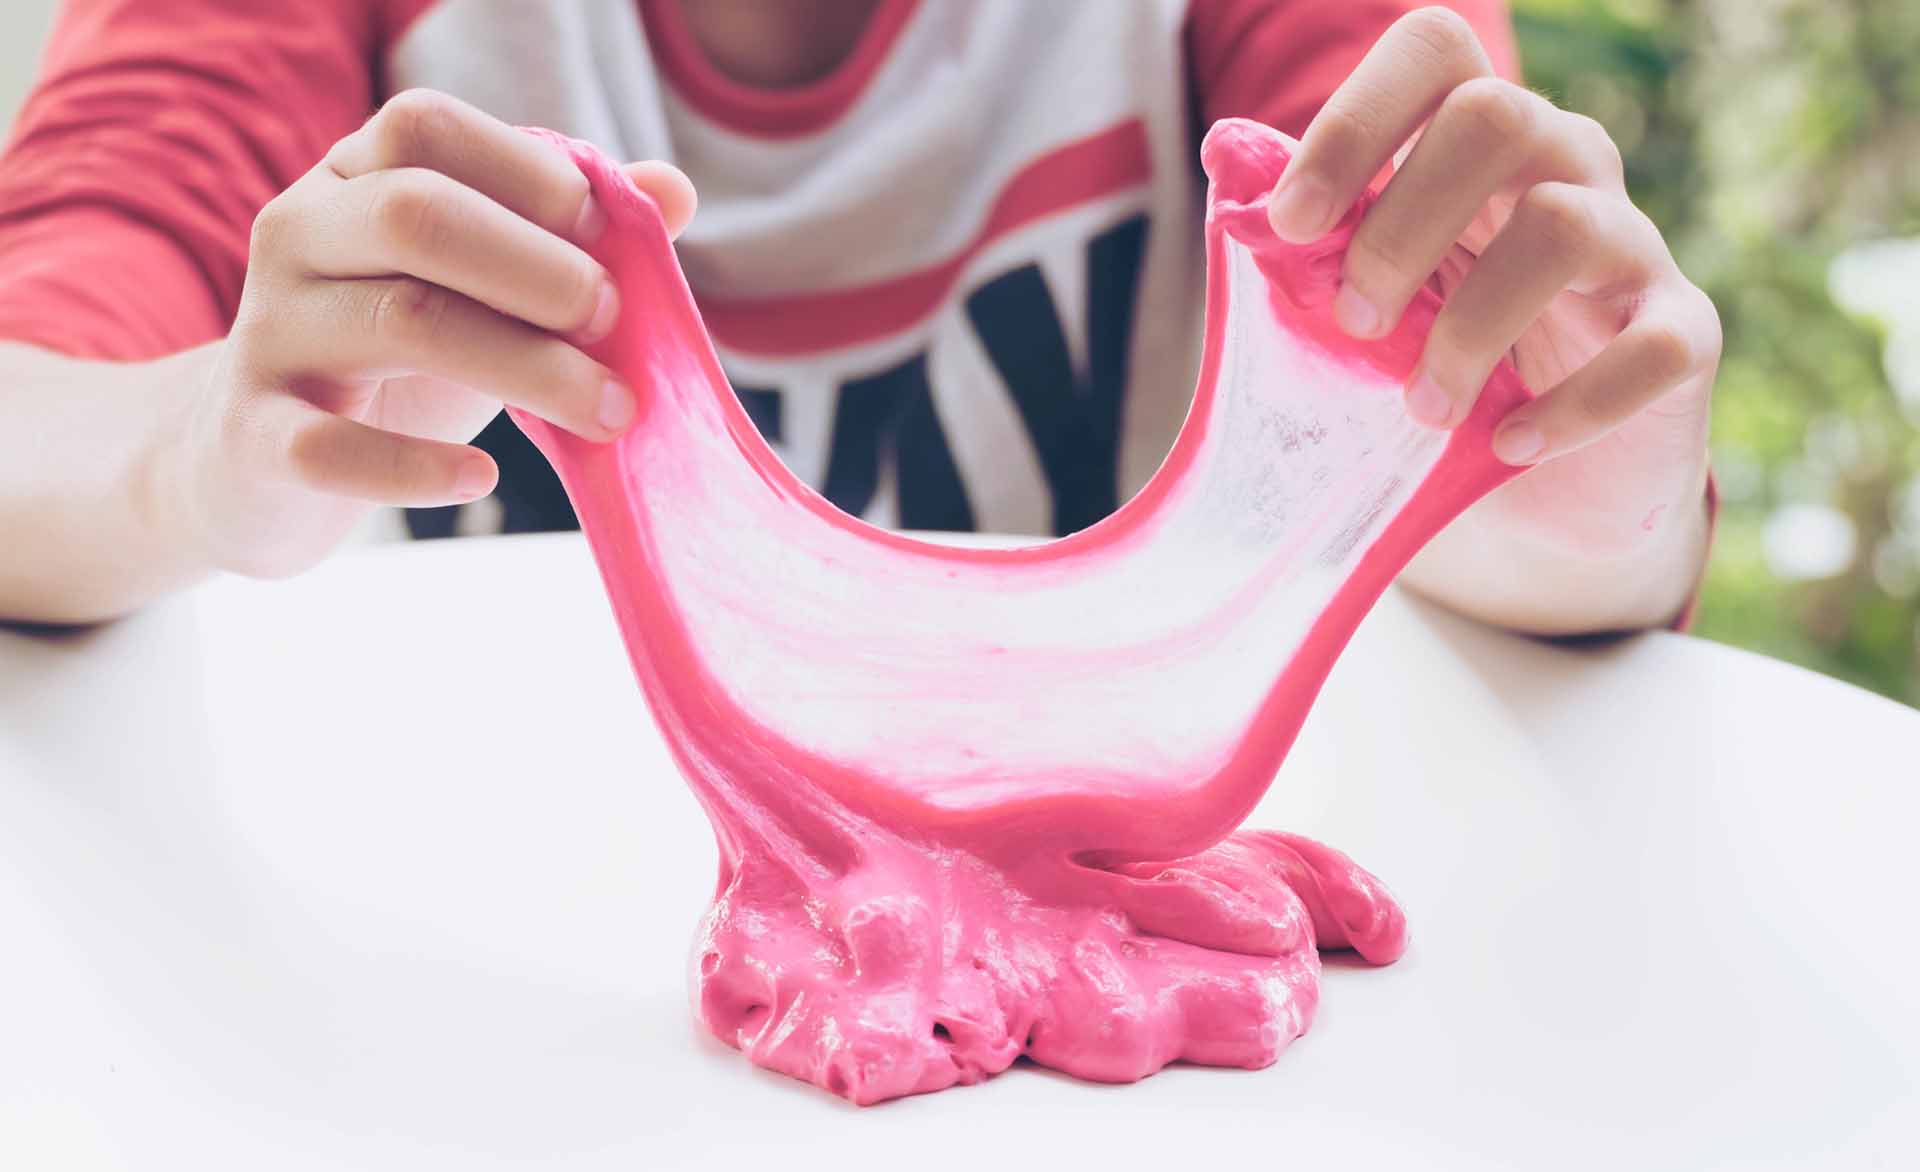 Hand Holding Homemade Plaything Called Slime, Teenager having fun and being creative homemade Toy, Selective focus on Slime.